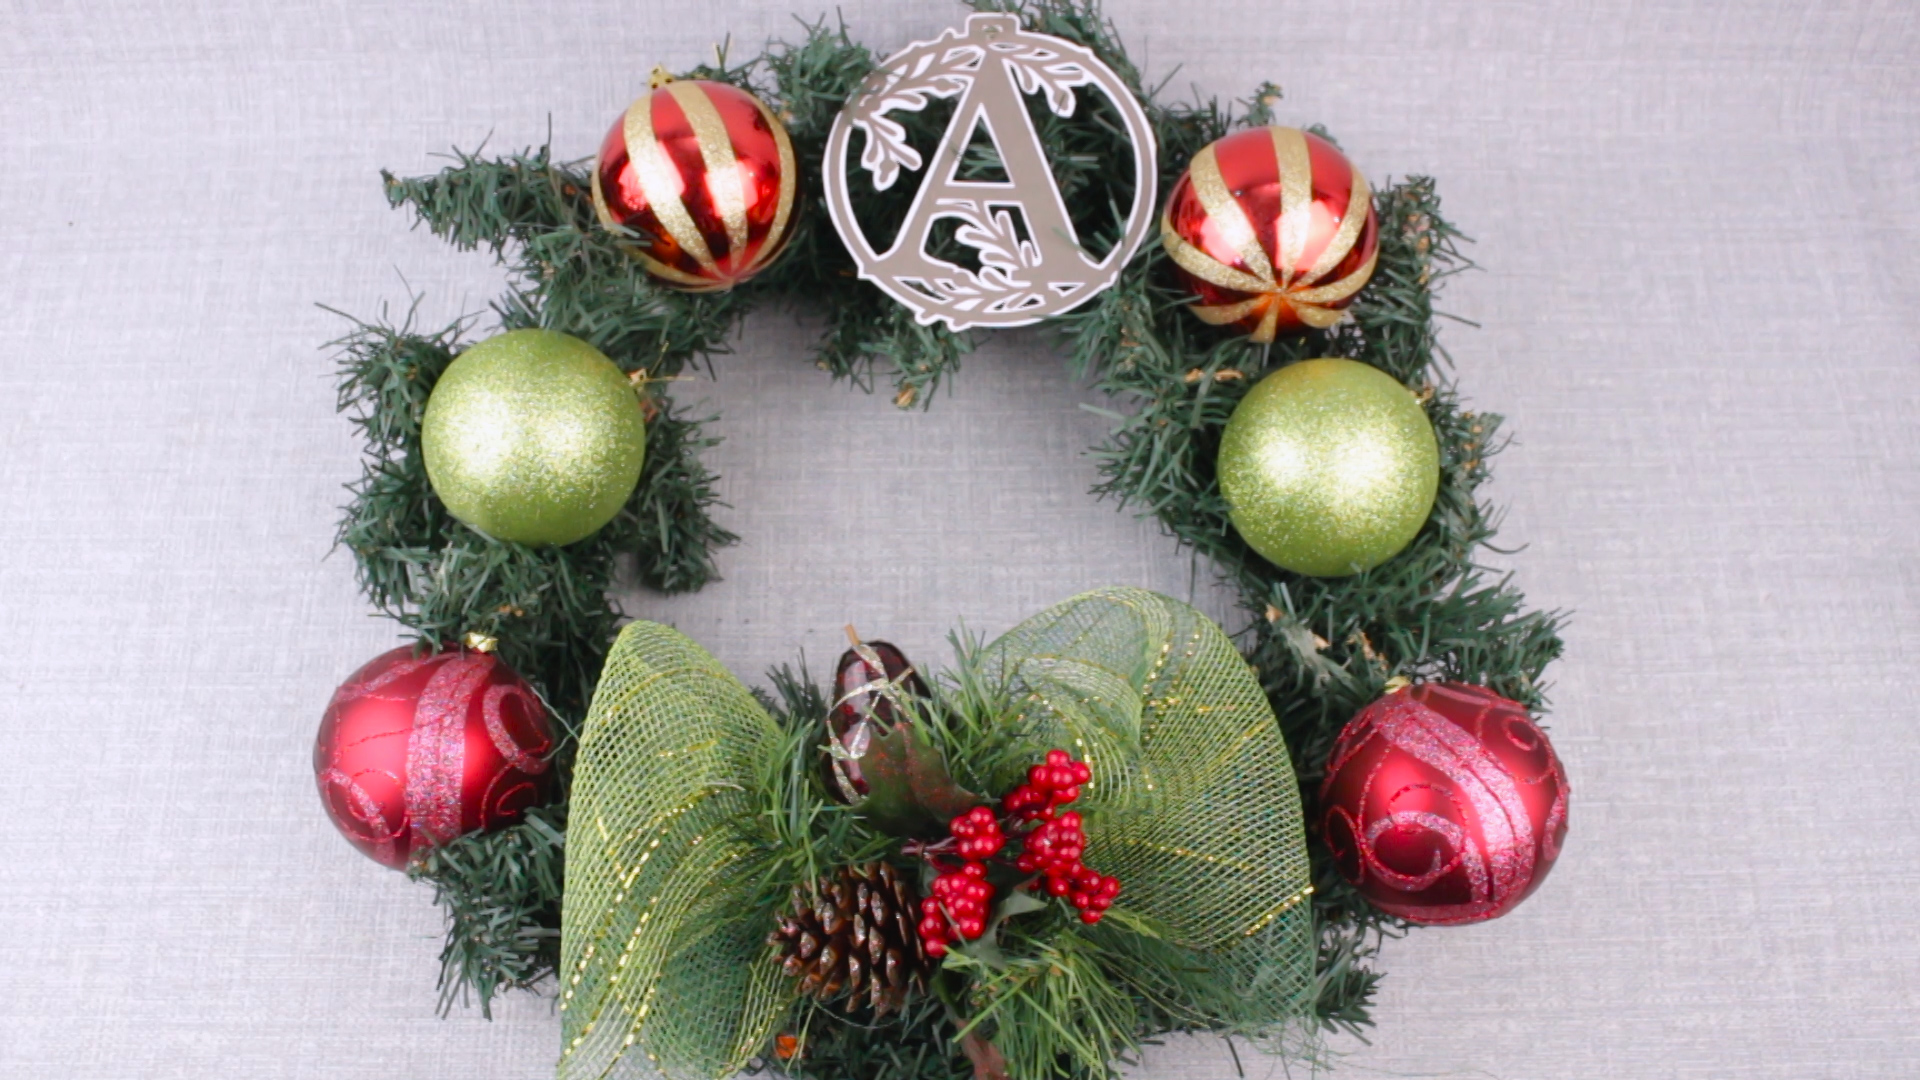 How to Decorate a Christmas Wreath: 13 Steps (with Picture)